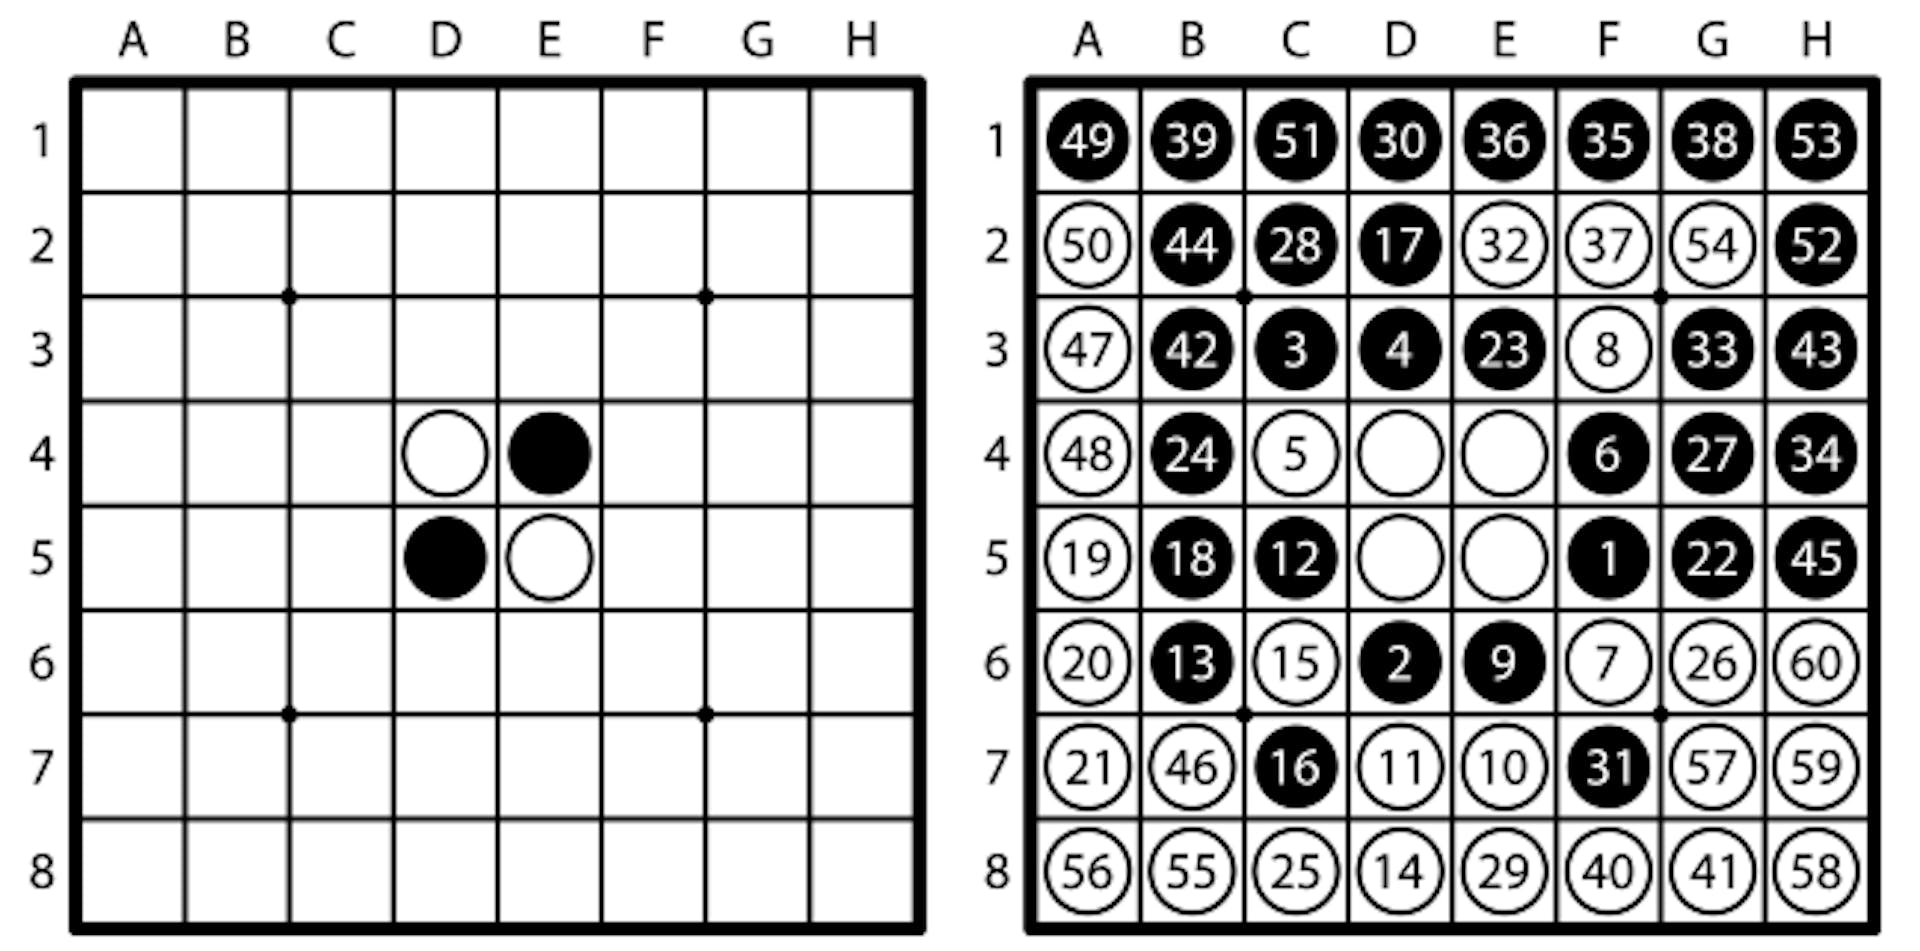 Figure 1: (Left) The initial board position of 8 × 8 Othello. (Right) A diagram of an optimal game record designated by our study. The game record is “F5D6C3D3 C4F4F6F3 E6E7D7C5 B6D8C6C7 D2B5A5A6 A7G5E3B4 C8G6G4C2 E8D1F7E2 G3H4F1E1 F2G1B1F8 G8B3H3B2 H5B7A3A4 A1A2C1H2 H1G2B8A8 G7H8H7H6”. The numbers in the stones indicate the order of moves, and the colors of stones indicate the final result. Our study confirms that if a deviation from this record occurs at any point, our software, playing as the opponent, is guaranteed a draw or win.